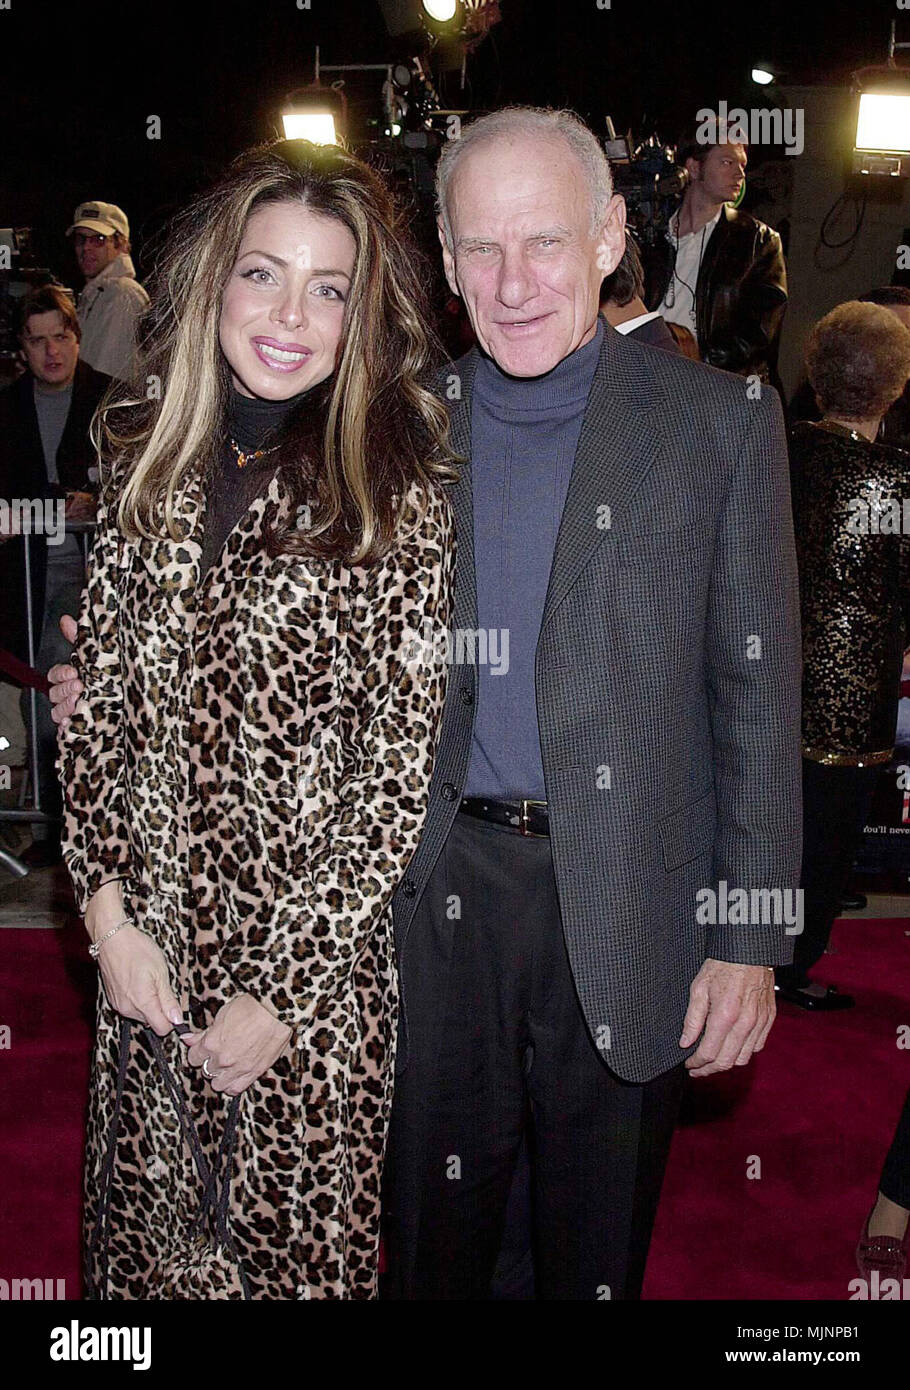 https://c8.alamy.com/comp/MJNPB1/19-dec-2000-original-caption-the-thirteen-days-premiere-was-held-at-the-westwood-theatre-in-los-angeles-tsuni-bourquard-michael-fairman-michael-fairman-michael-fairman-event-in-hollywood-life-california-red-carpet-event-vertical-usa-film-industry-celebrities-photography-bestof-arts-culture-and-entertainment-topix-celebrities-fashion-from-the-red-carpet-1994-2000-one-person-vertical-best-of-hollywood-life-event-in-hollywood-life-california-red-carpet-and-backstage-usa-film-industry-celebrities-photography-bestof-arts-culture-and-entertainment-MJNPB1.jpg